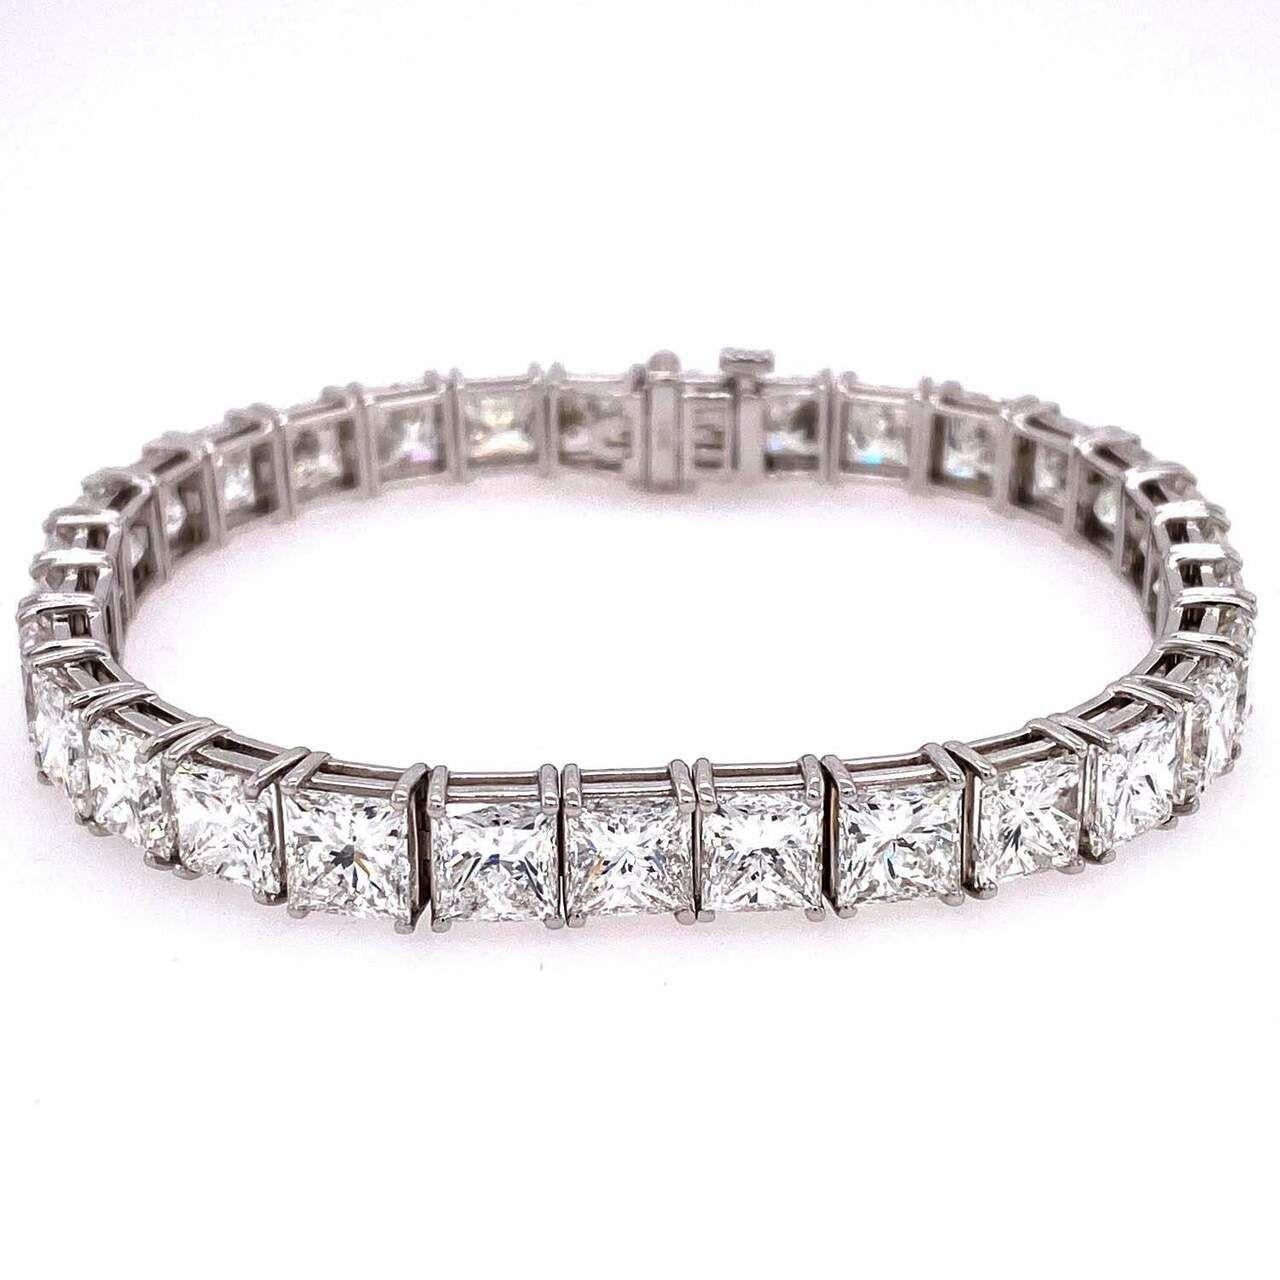 An exquisite hand crafted tennis bracelet
We have carefully chosen each individual emerald cut diamond for both their amazing dazzling colorless( D-I color)
appearance, and super clarity (VVS1-Vs )
Each diamond is perfectly matched for millimeter